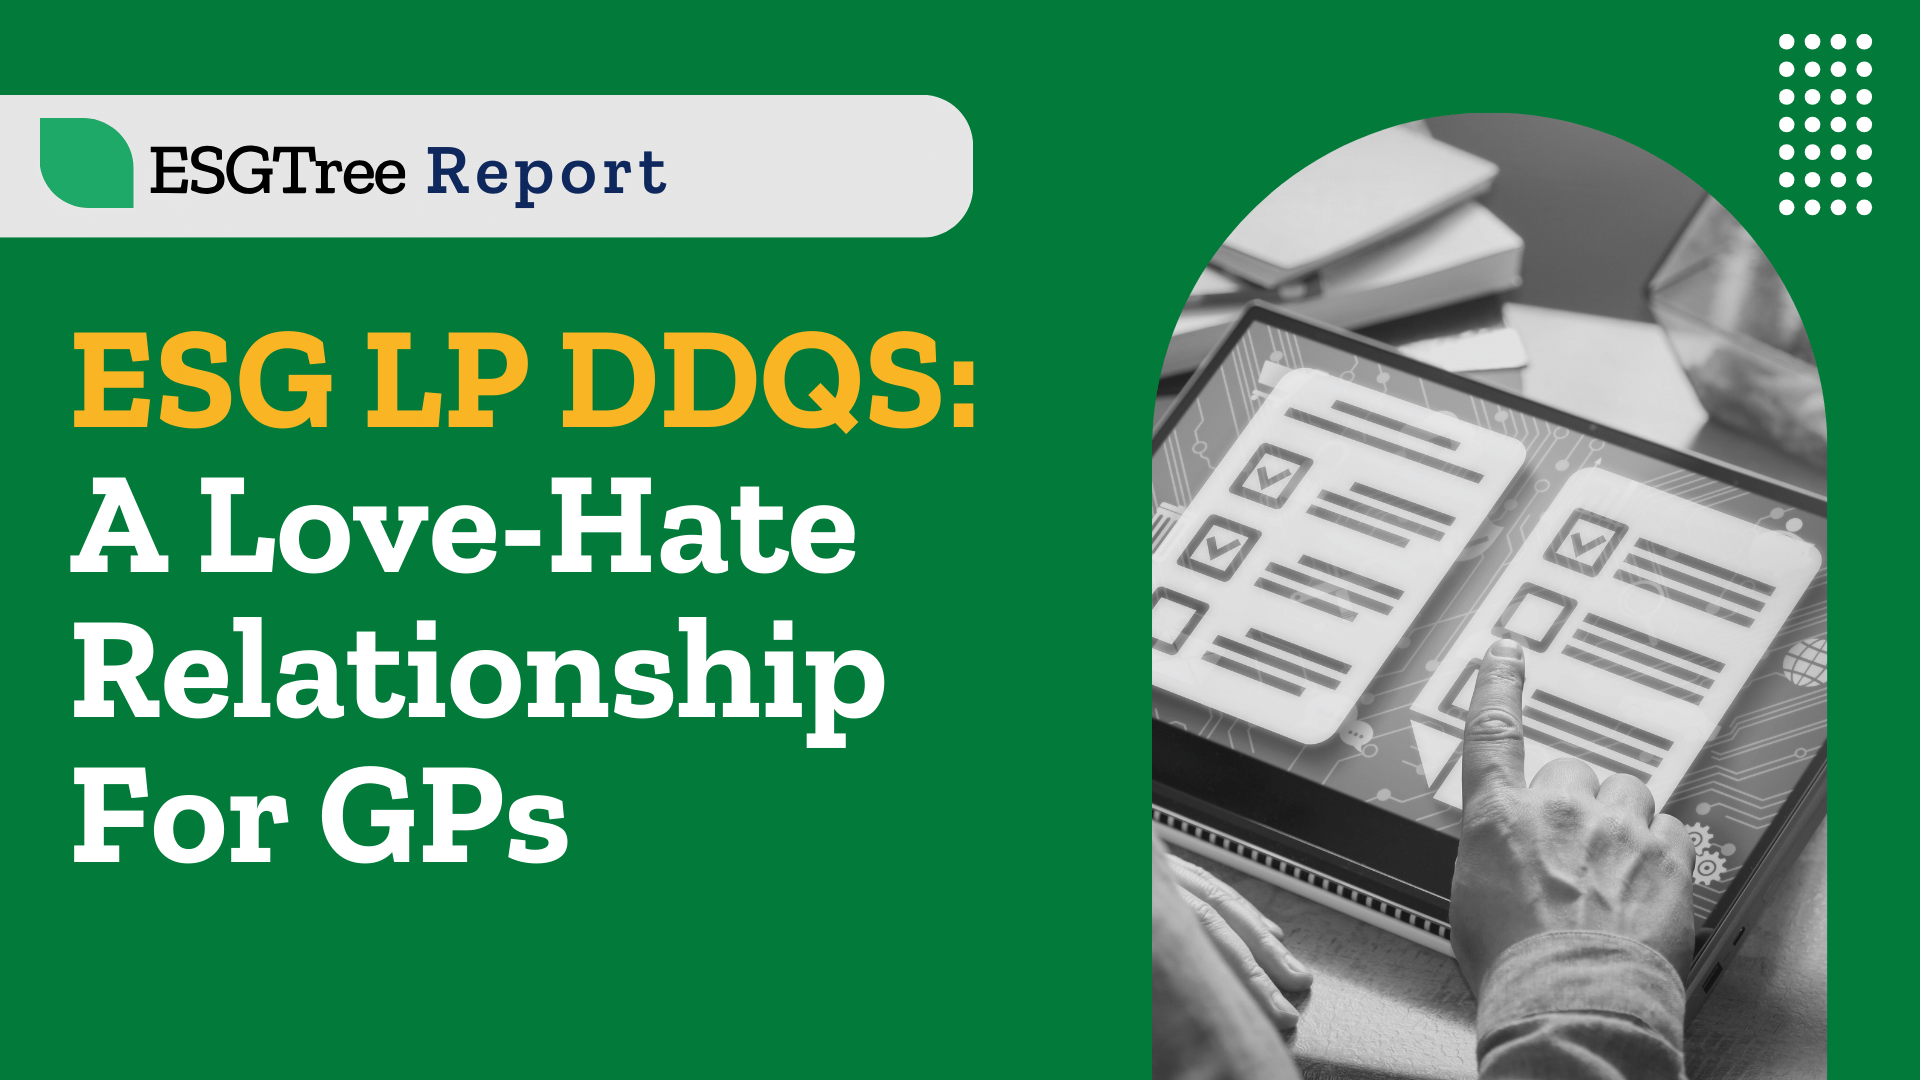 ESG LP DDQs: A Love Hate Relationship For GPs